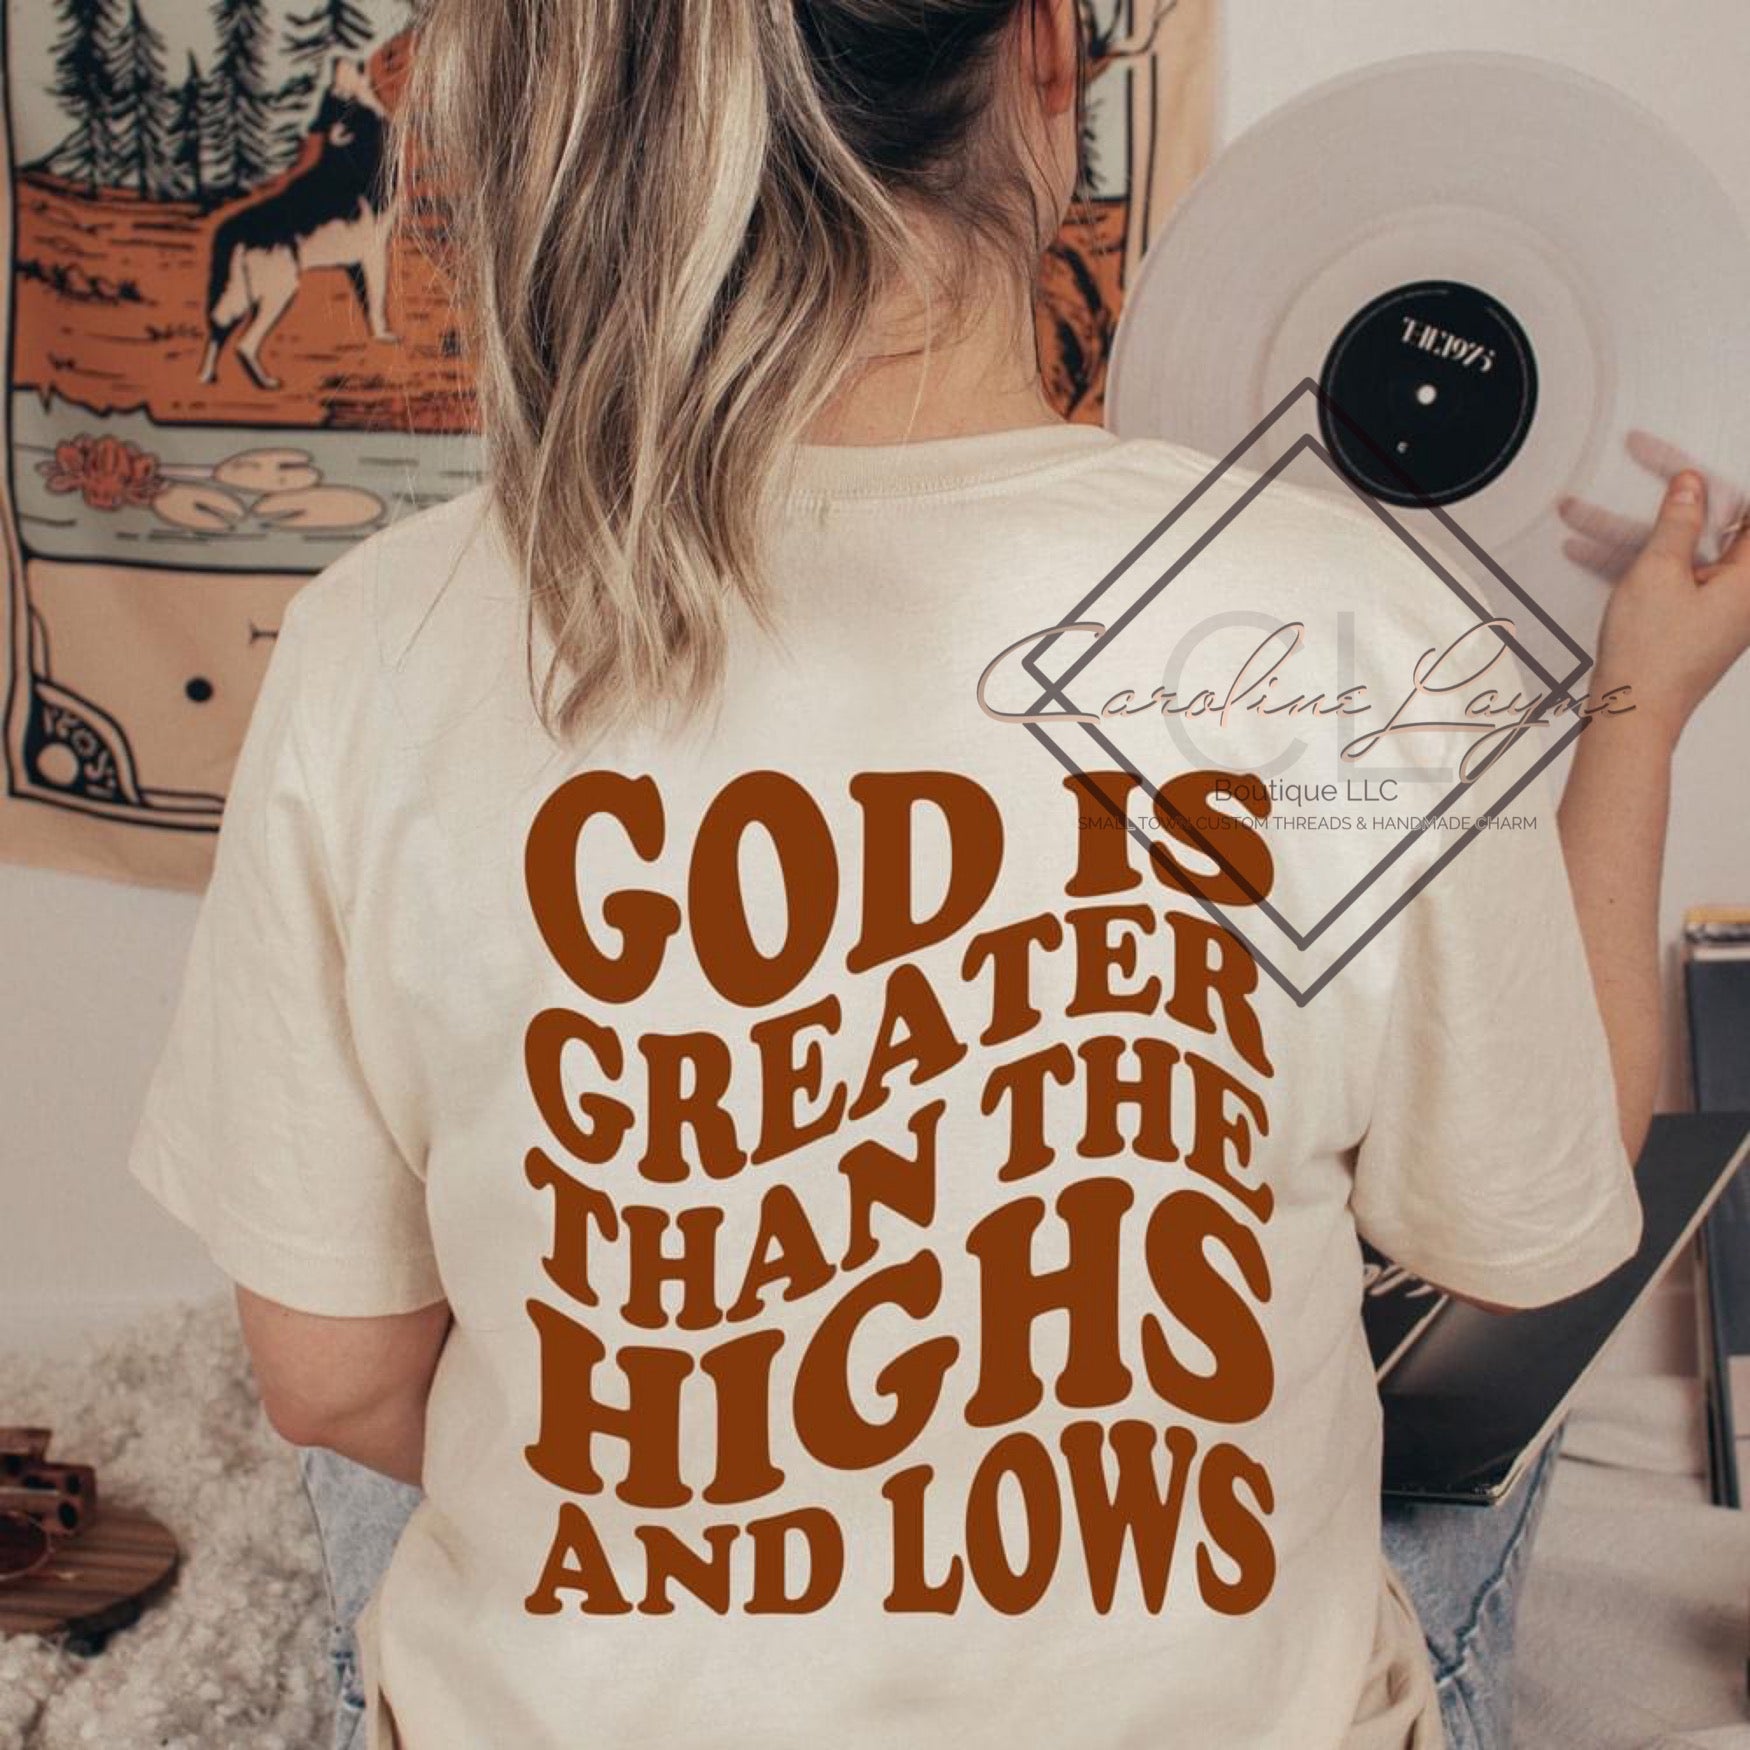 God is greater than the highs and lows Tee - Caroline Layne Boutique LLC